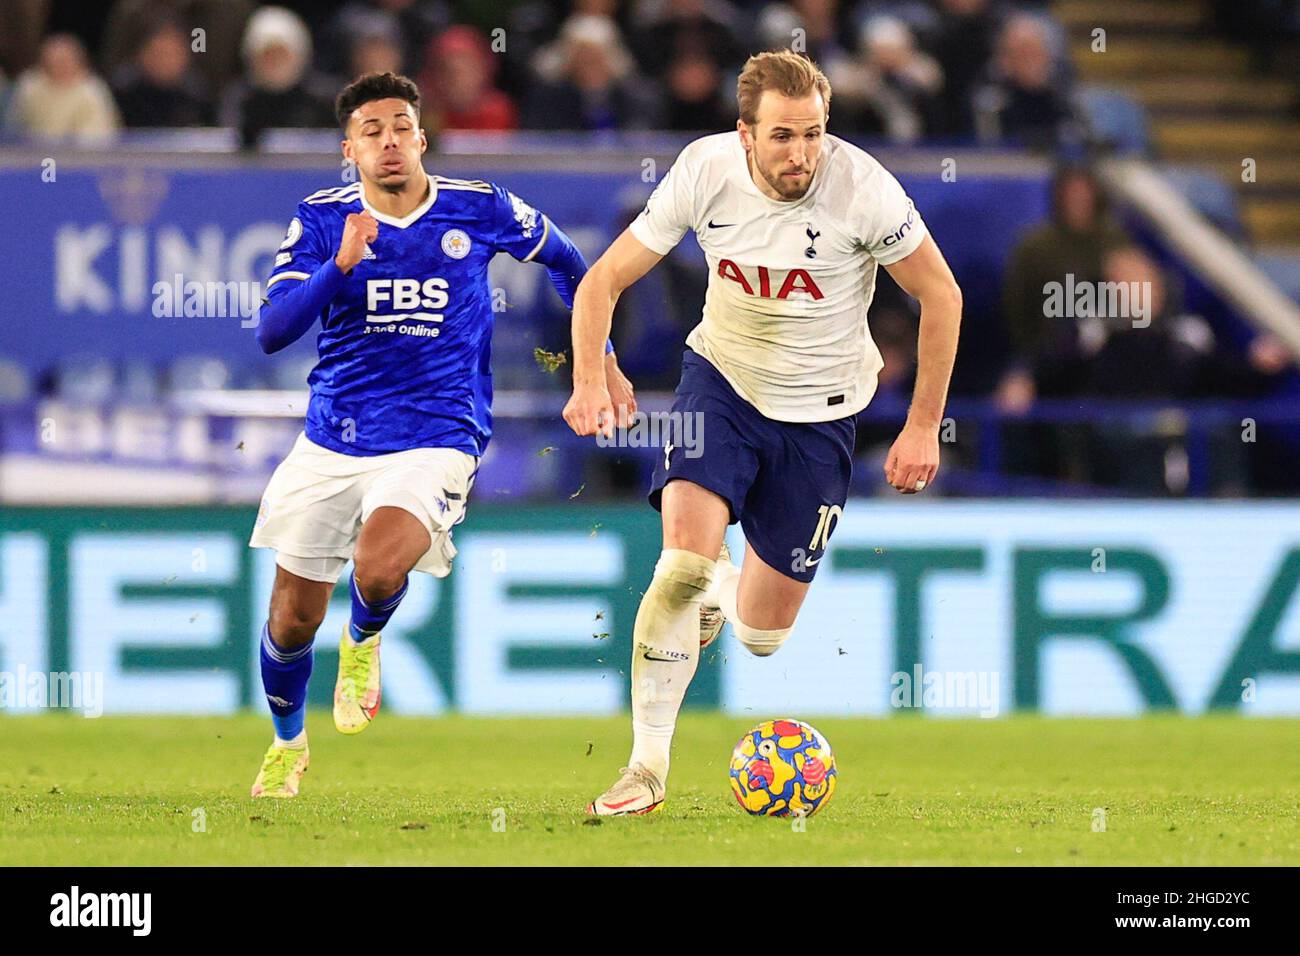 Leicester, UK. 19th Jan, 2022. Harry Kane #10 of Tottenham Hotspur is chased by James Justin #2 of Leicester City in Leicester, United Kingdom on 1/19/2022. (Photo by Conor Molloy/News Images/Sipa USA) Credit: Sipa USA/Alamy Live News Stock Photo